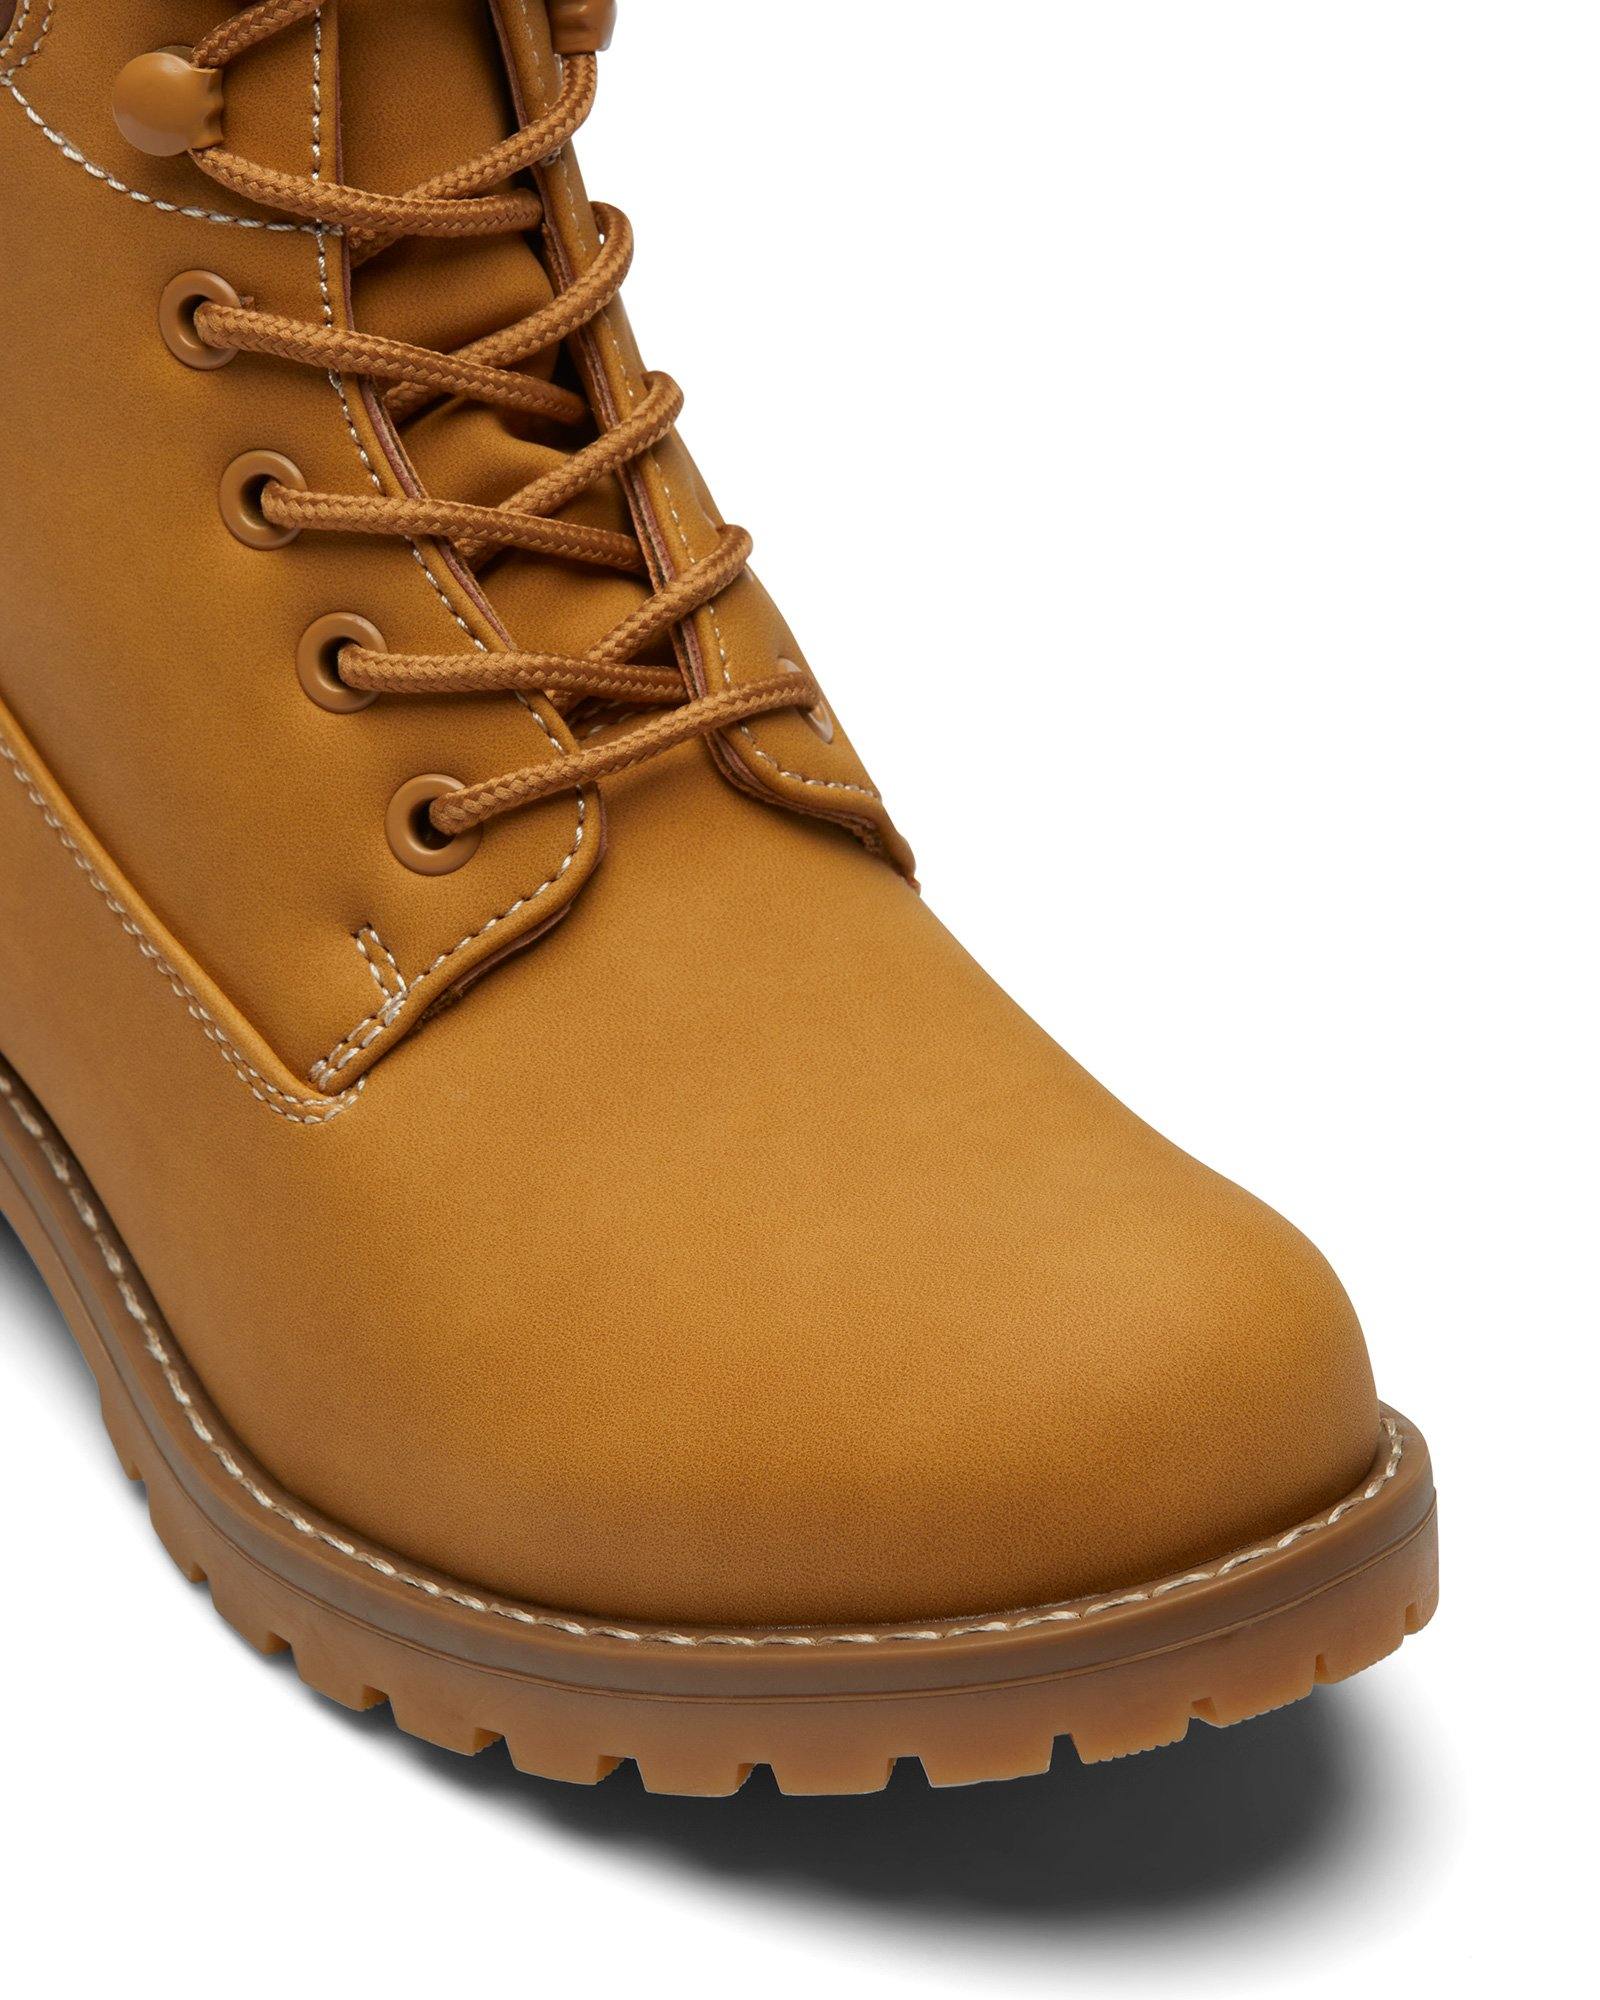 Therapy Shoes Dreww Camel | Women's Boots | Ankle | Combat | Lace Up